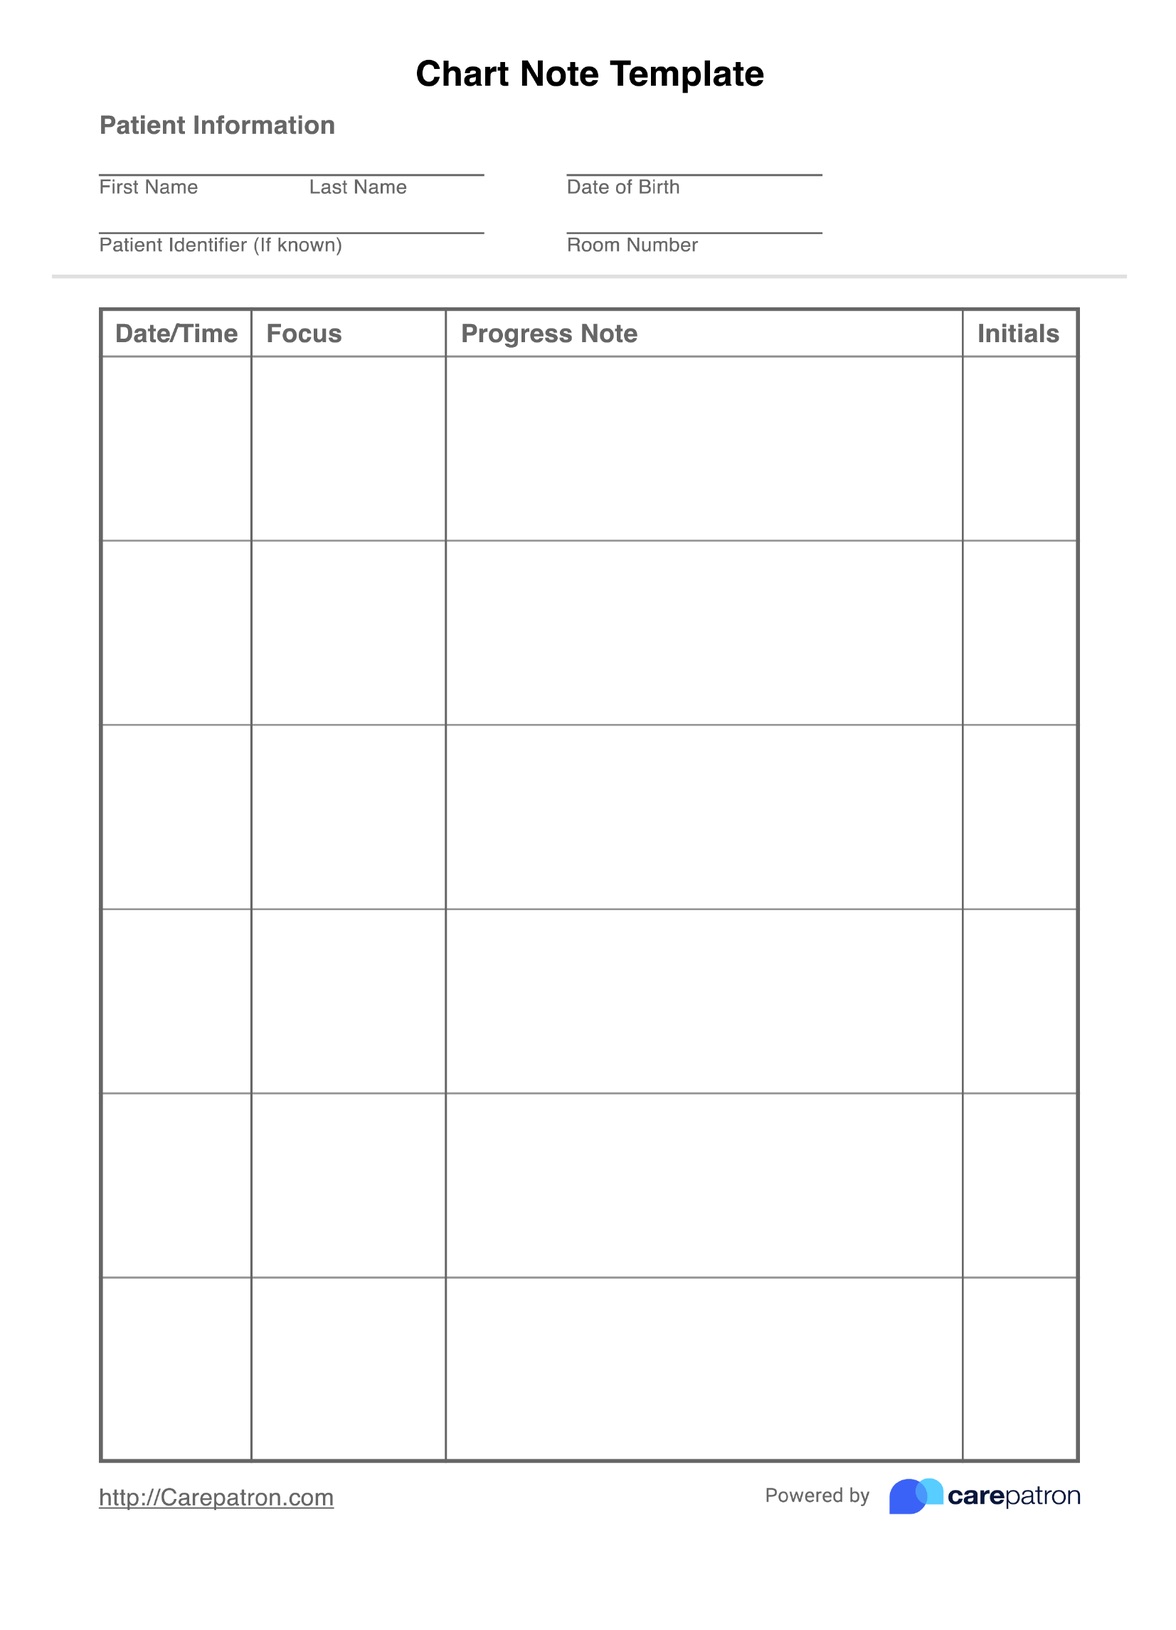 Chart Note Template PDF Example